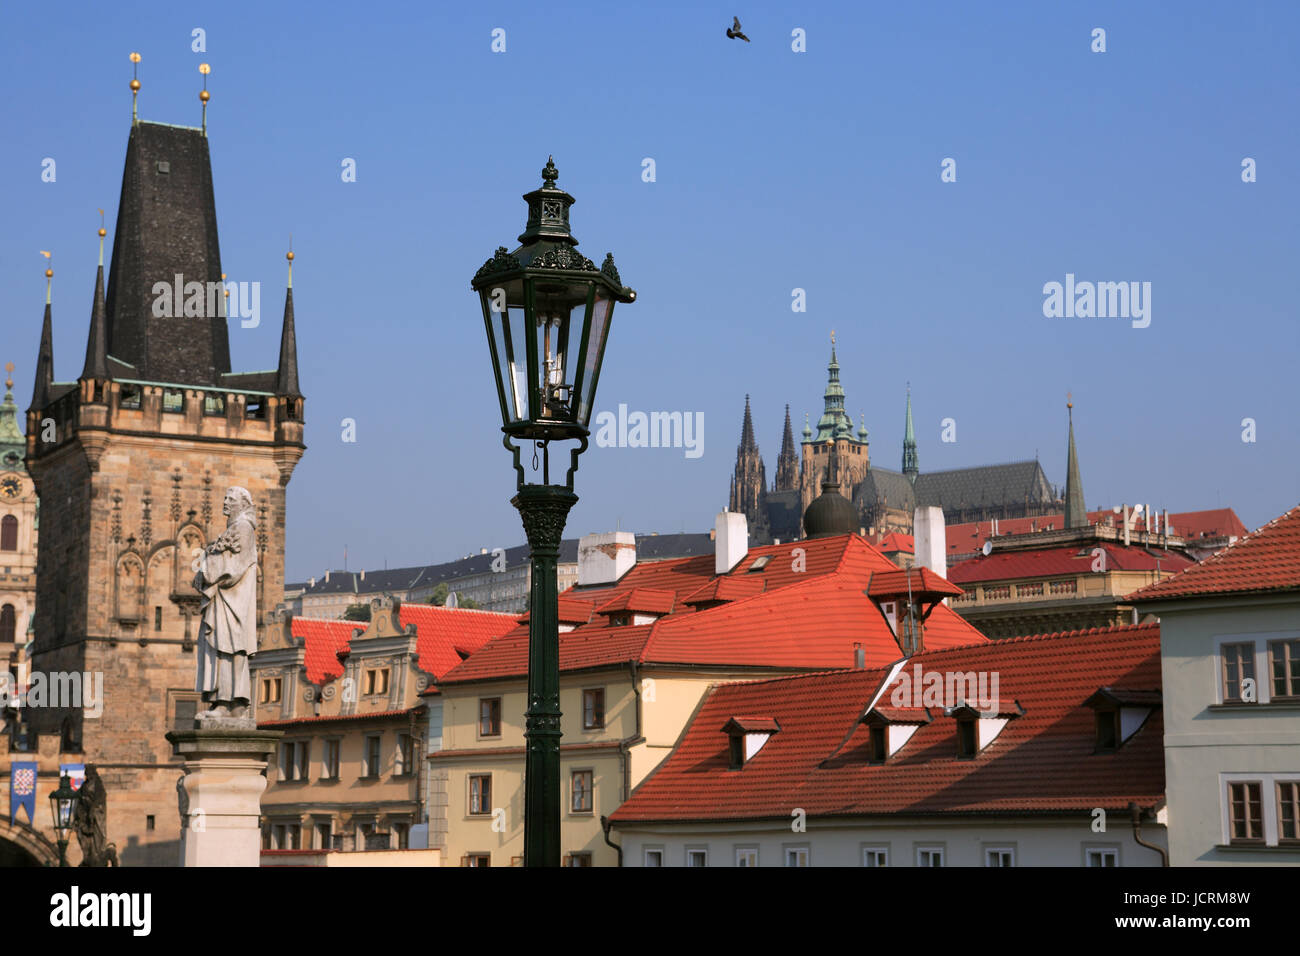 Vintage street lamp on background with gothic towers and tiled roofs in Prague Stock Photo